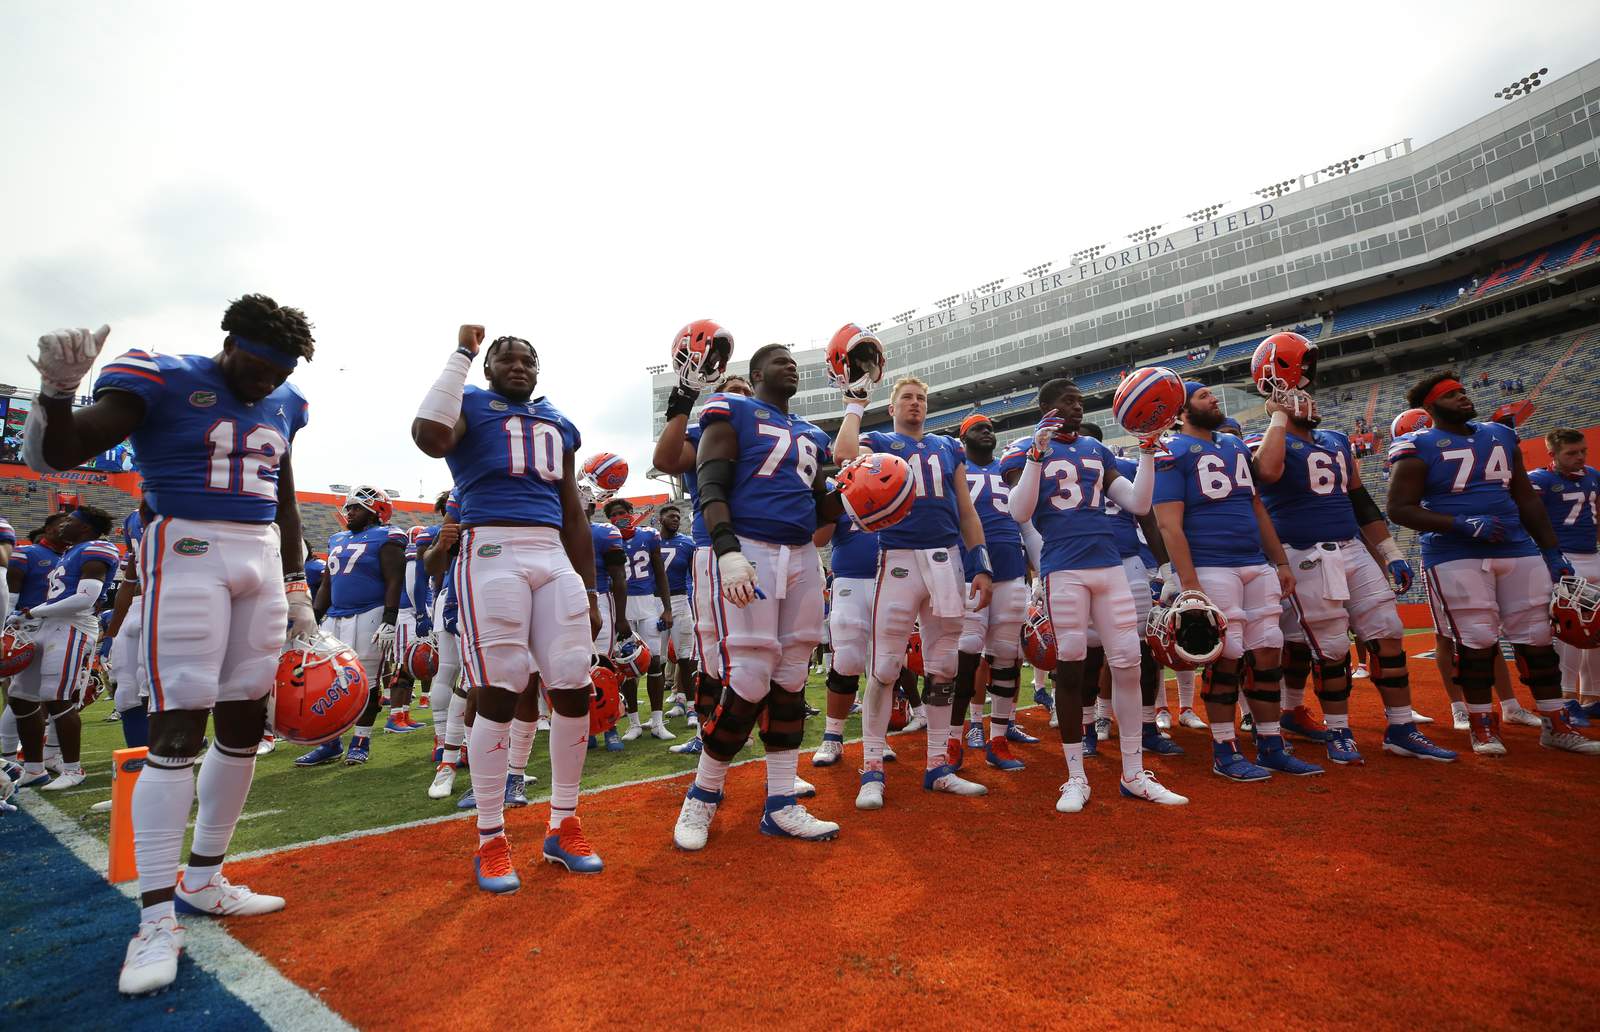 New report suggests less college football could kill 50,000 Florida jobs